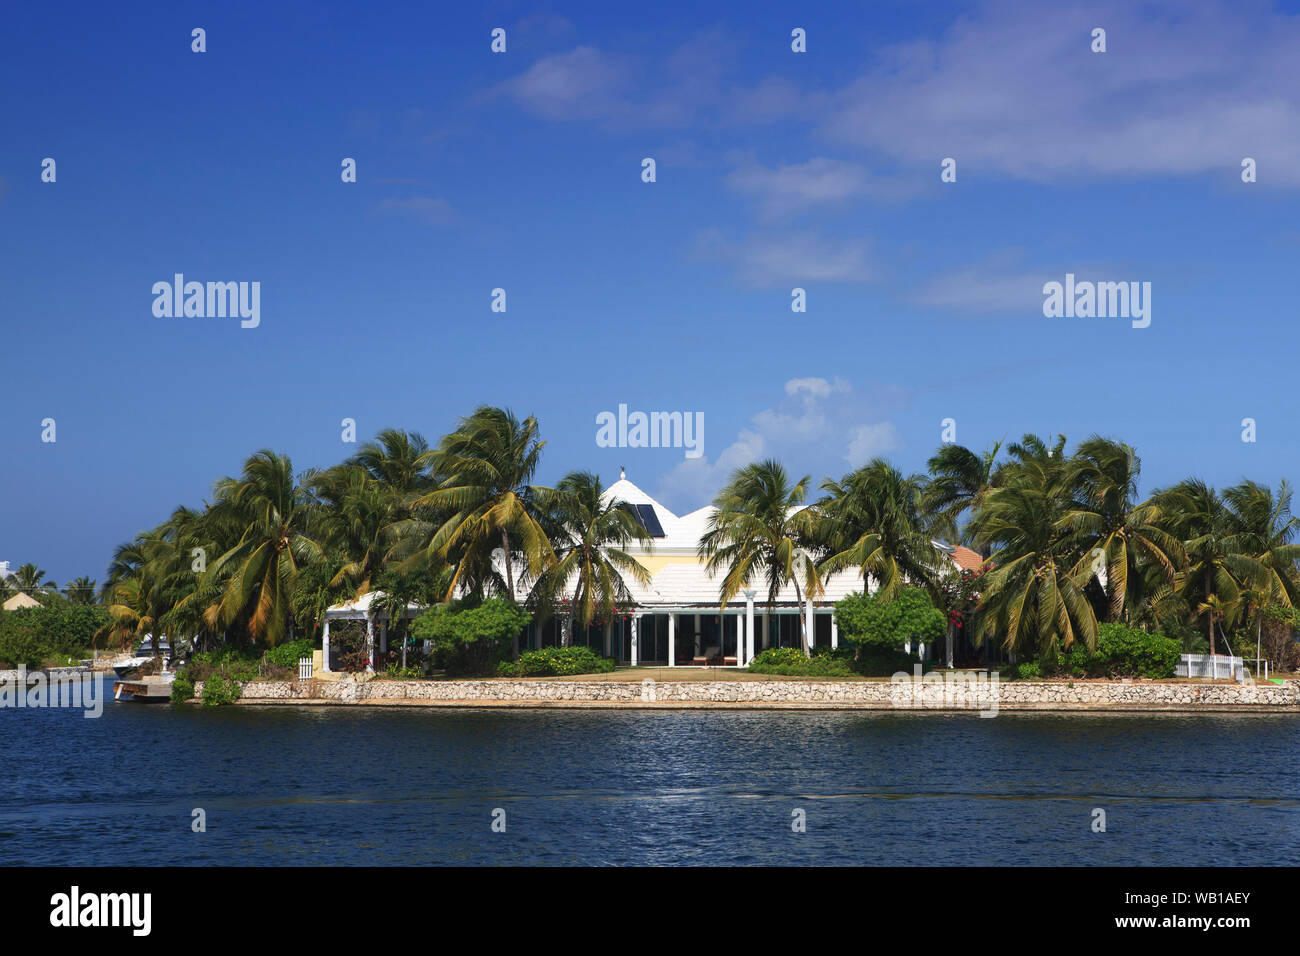 Internal waterway on Grand Cayman with large house Stock Photo